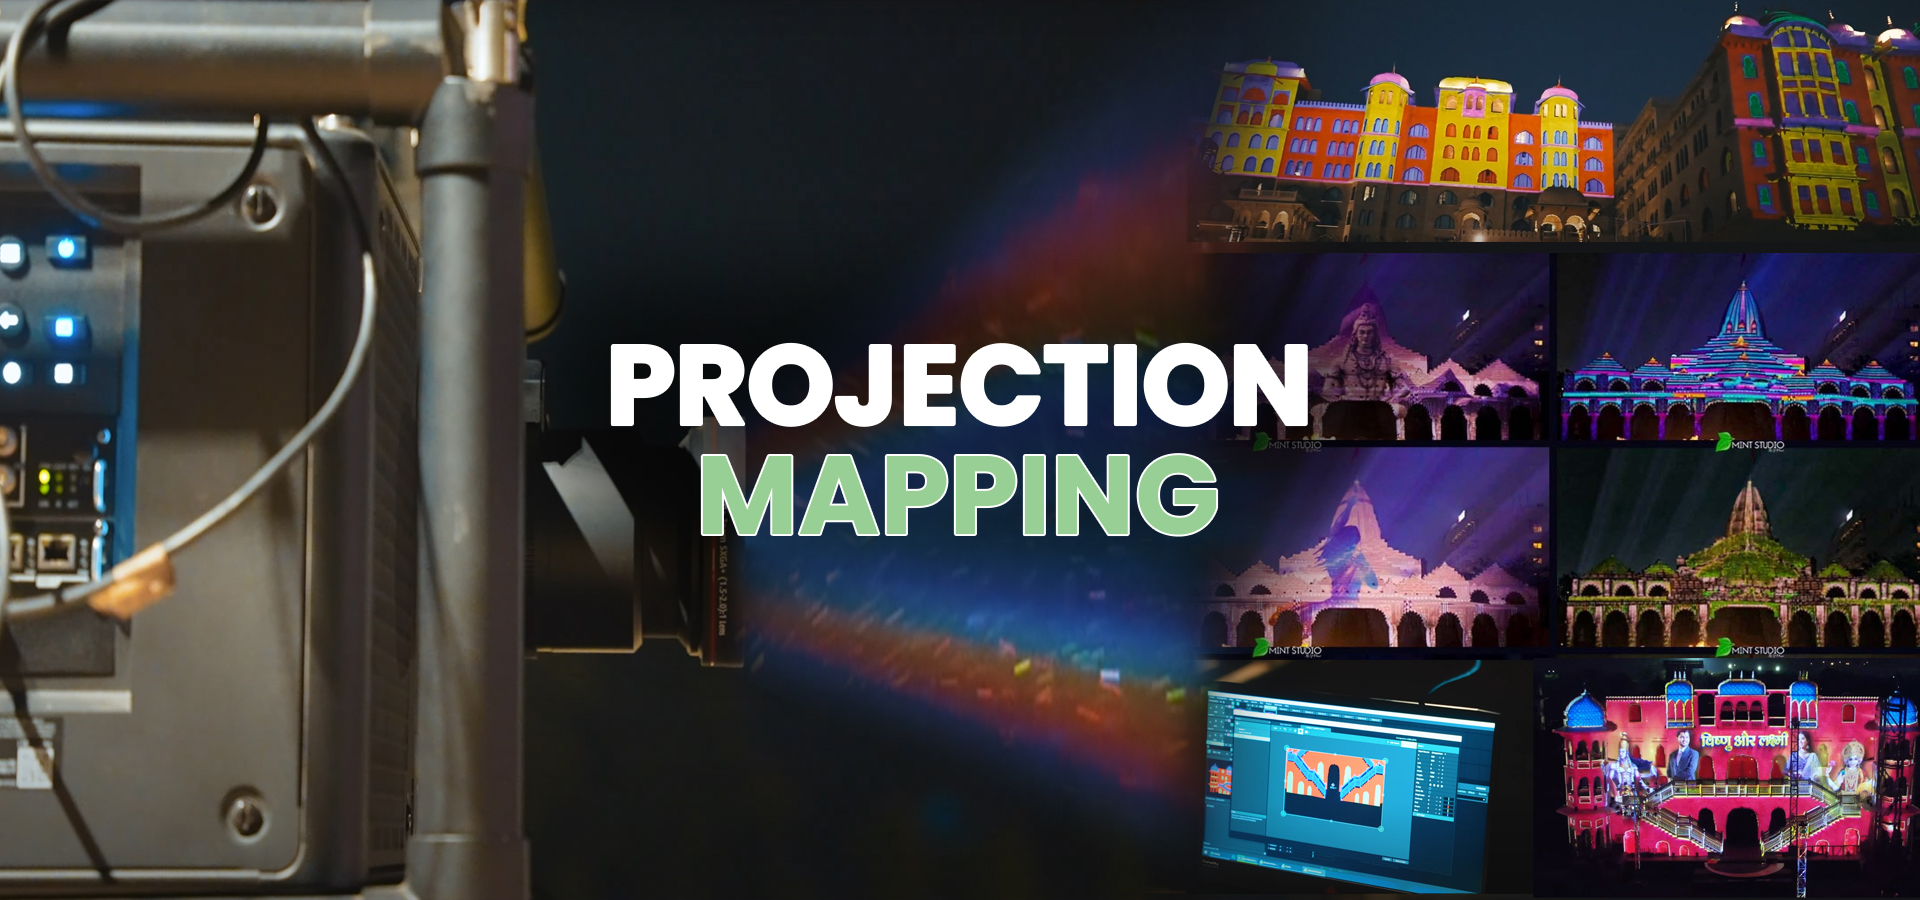 Website ThumbnailsProjection Mapping 1 